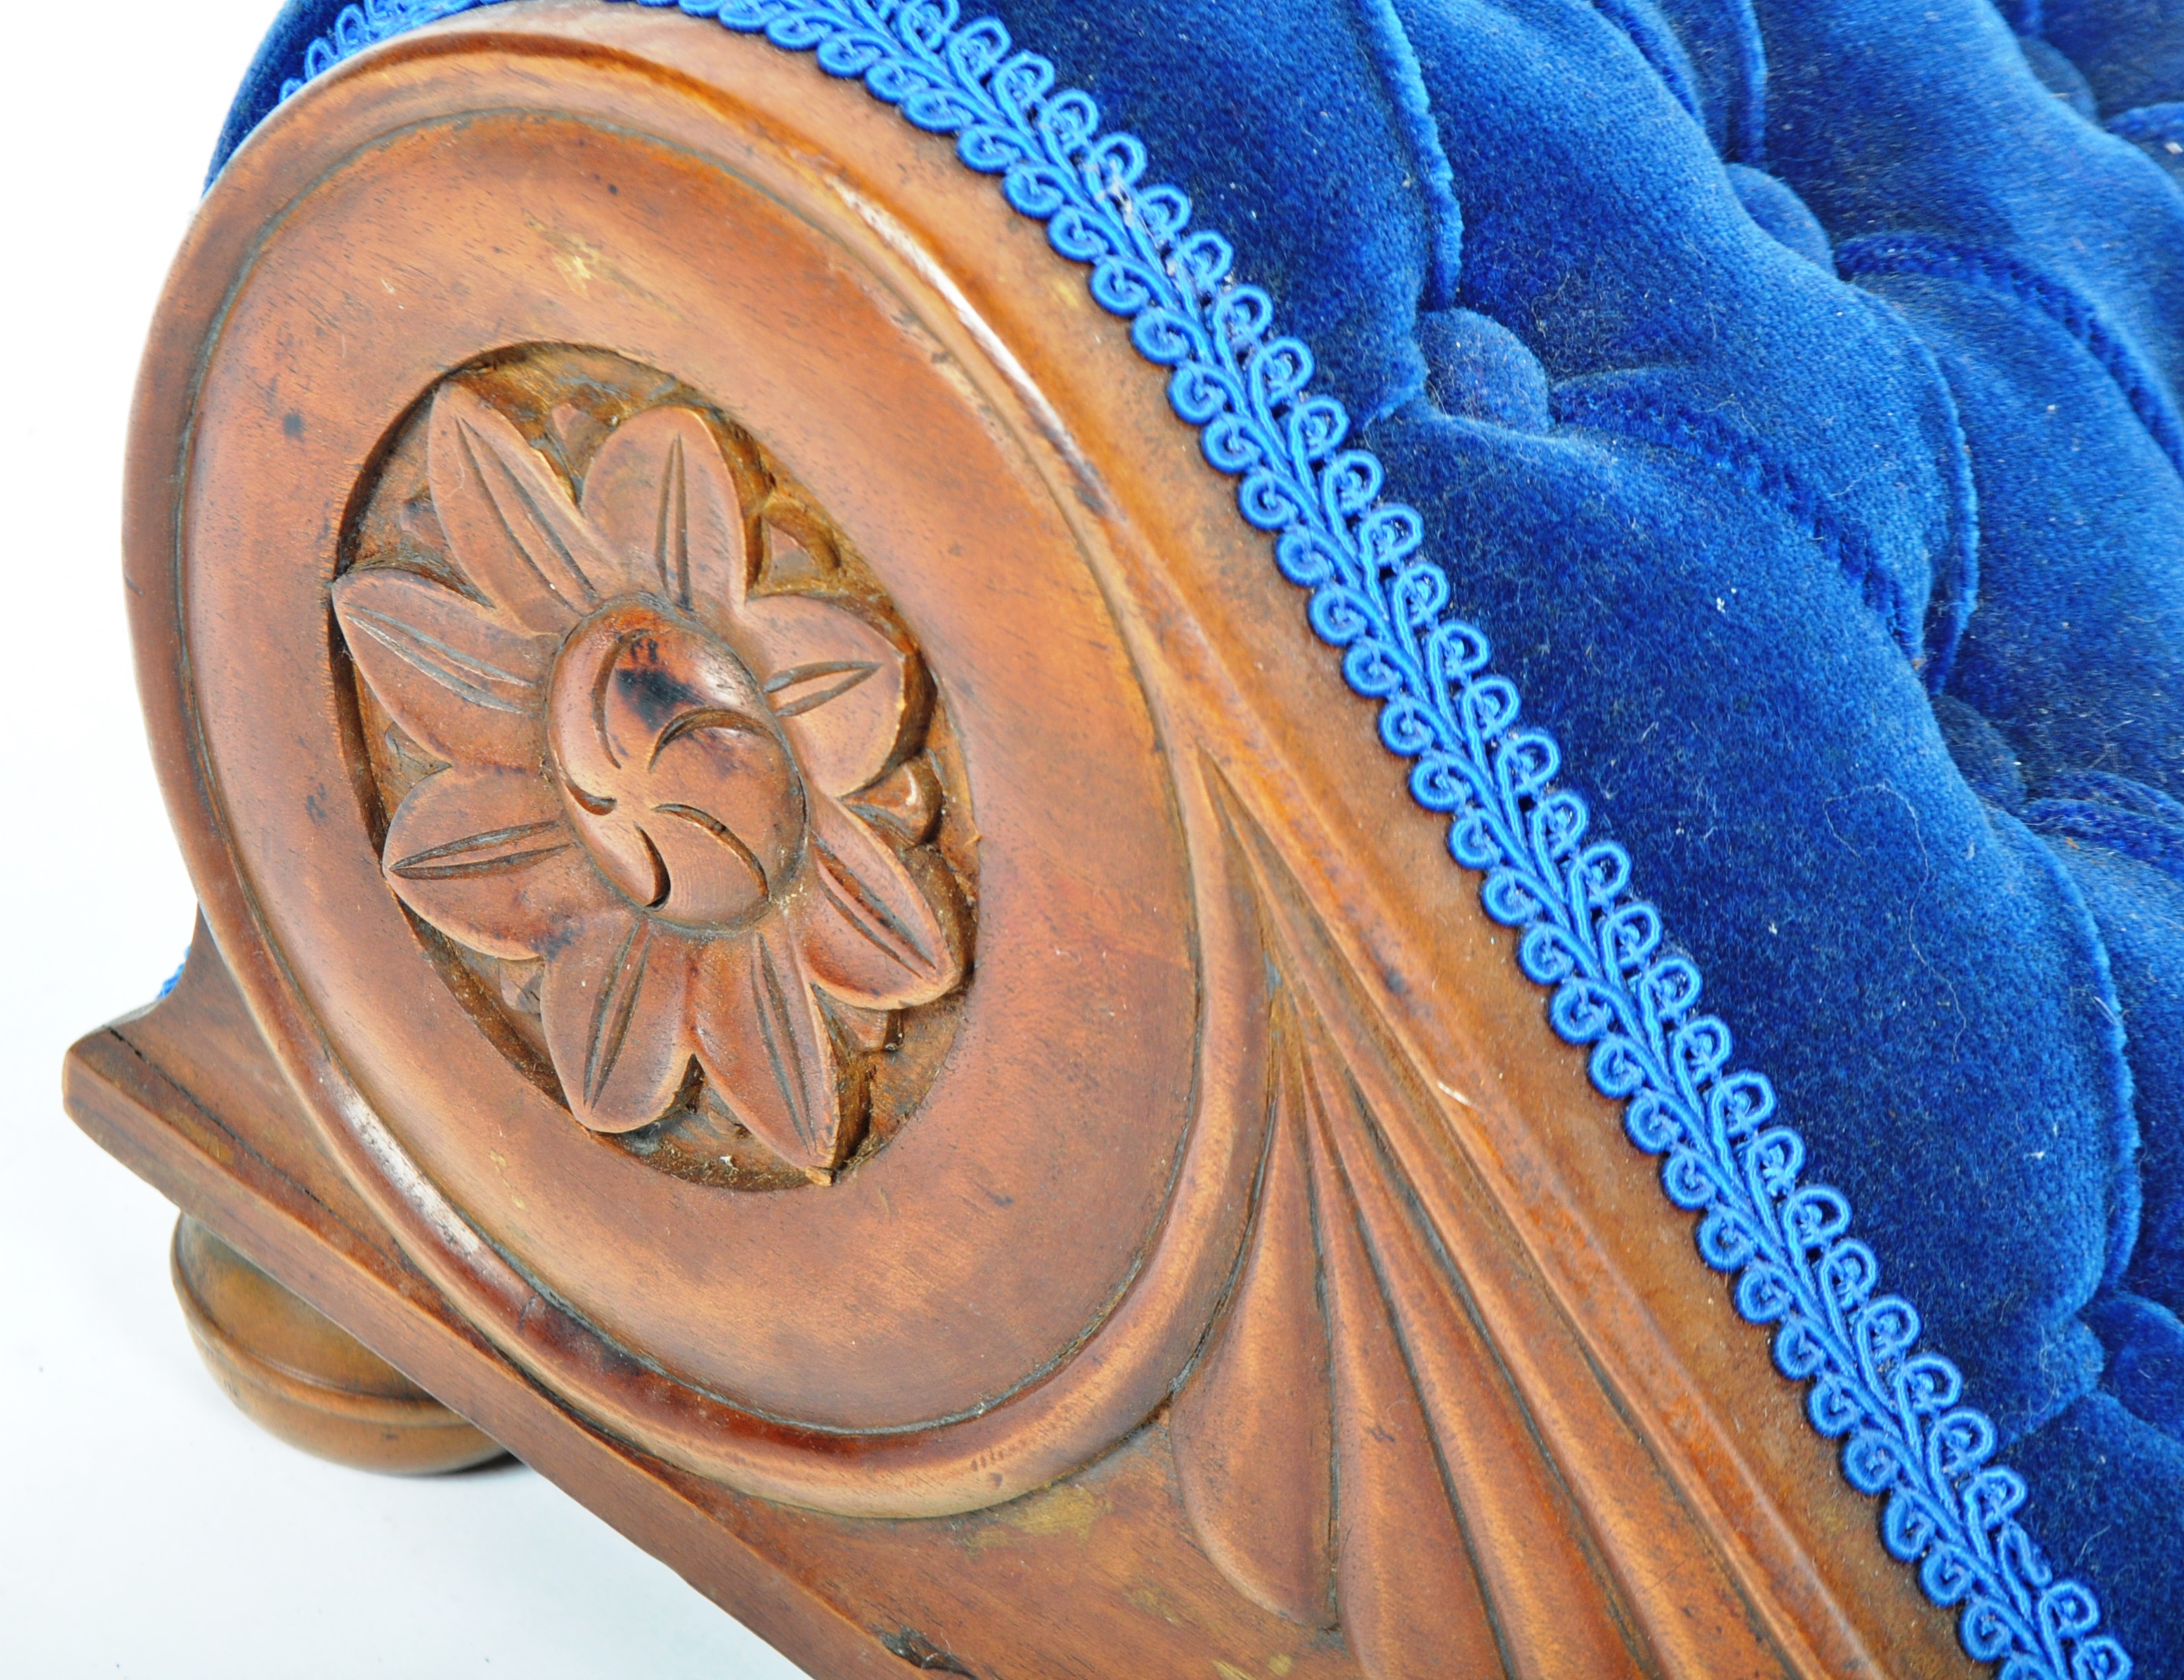 MATCHING PAIR OF VICTORIAN MAHOGANY AND BLUE VELVET GOUT STOOLS - Image 4 of 7